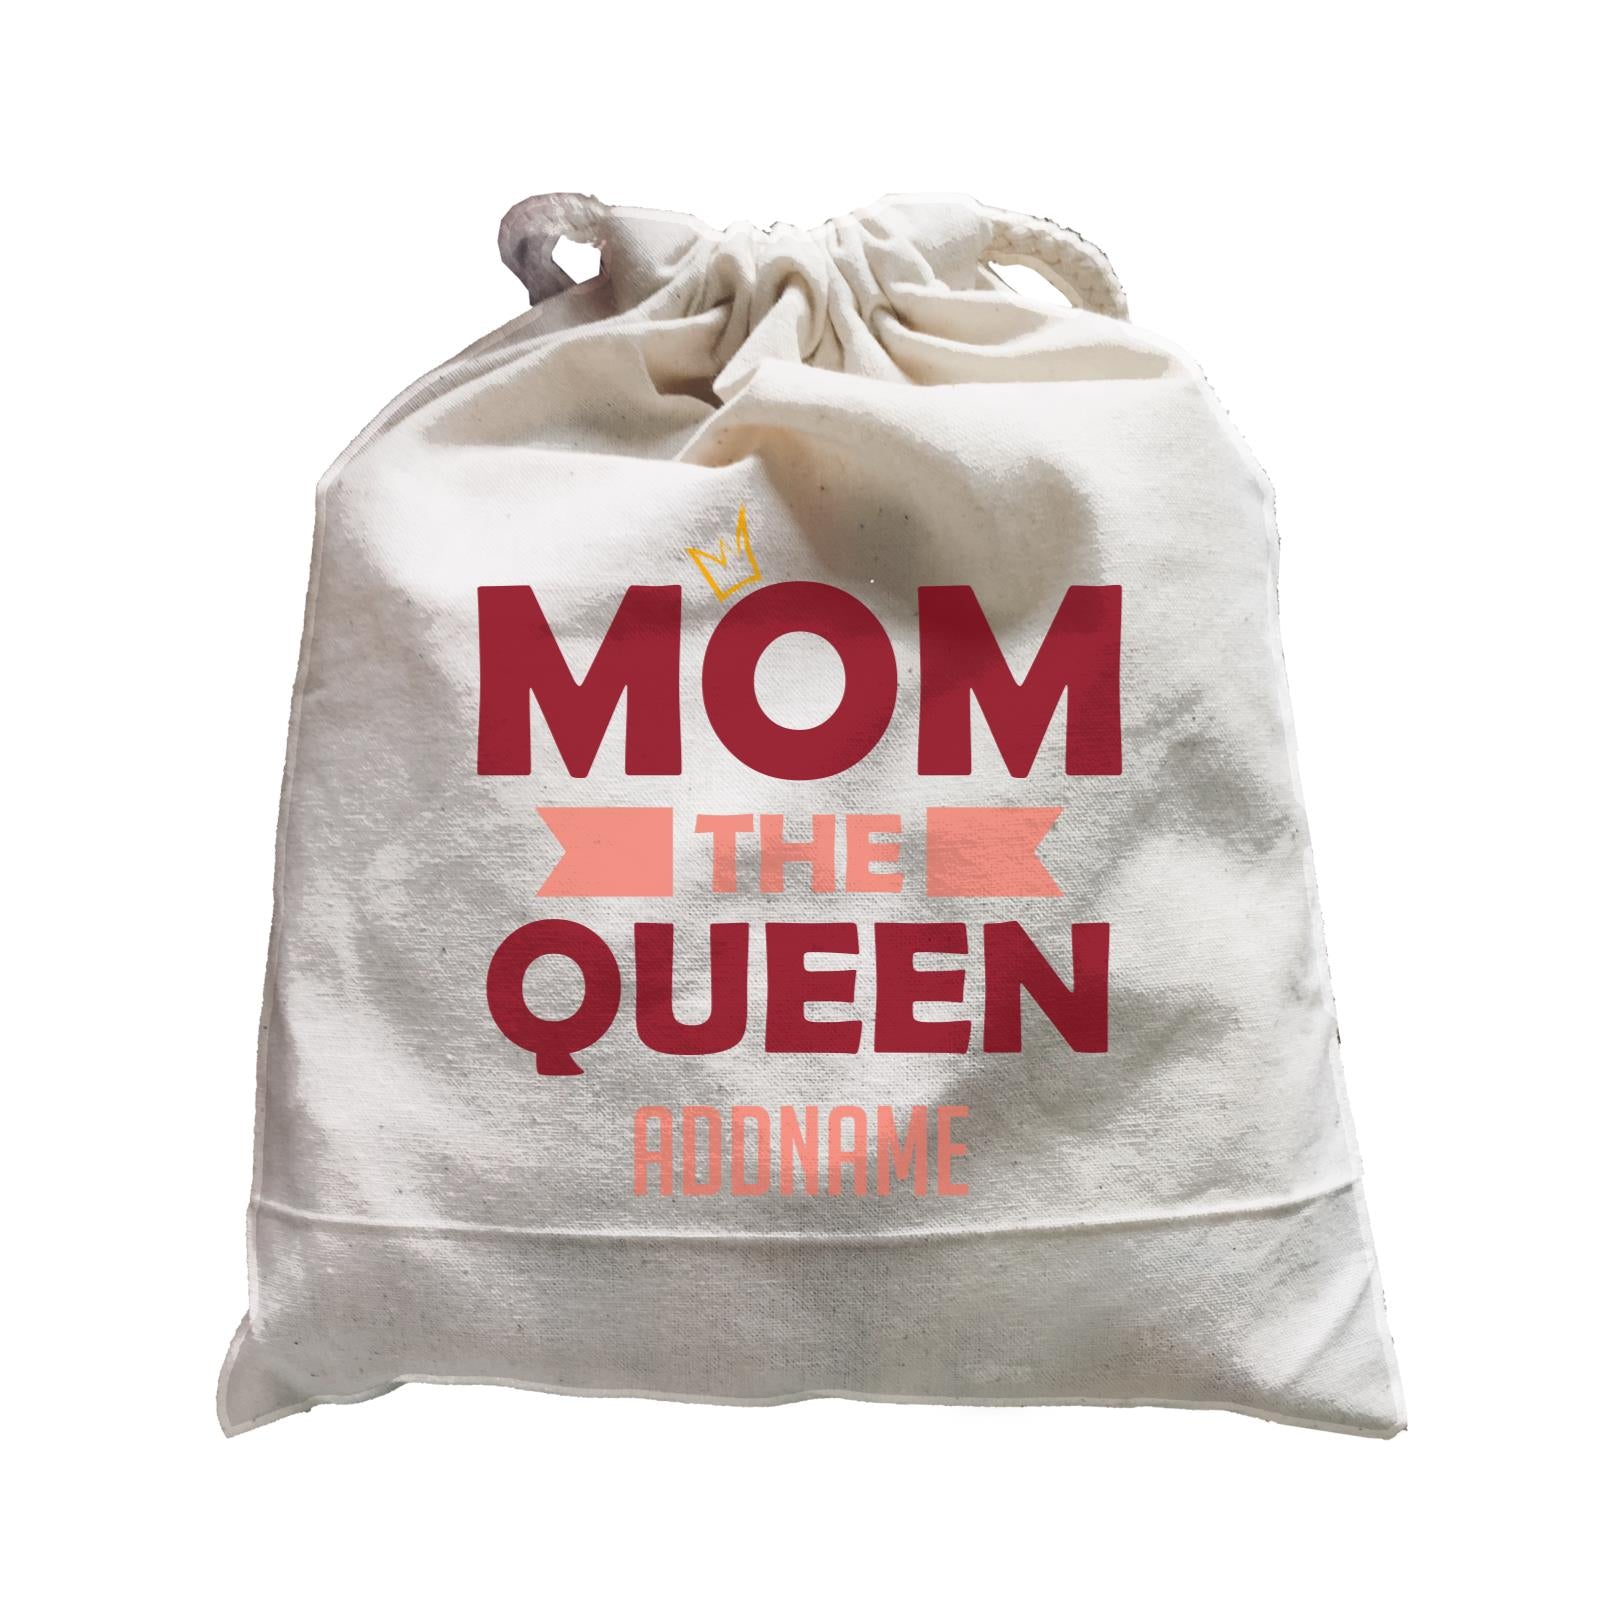 Awesome Mom 2 Mom The Queen Addname Satchel